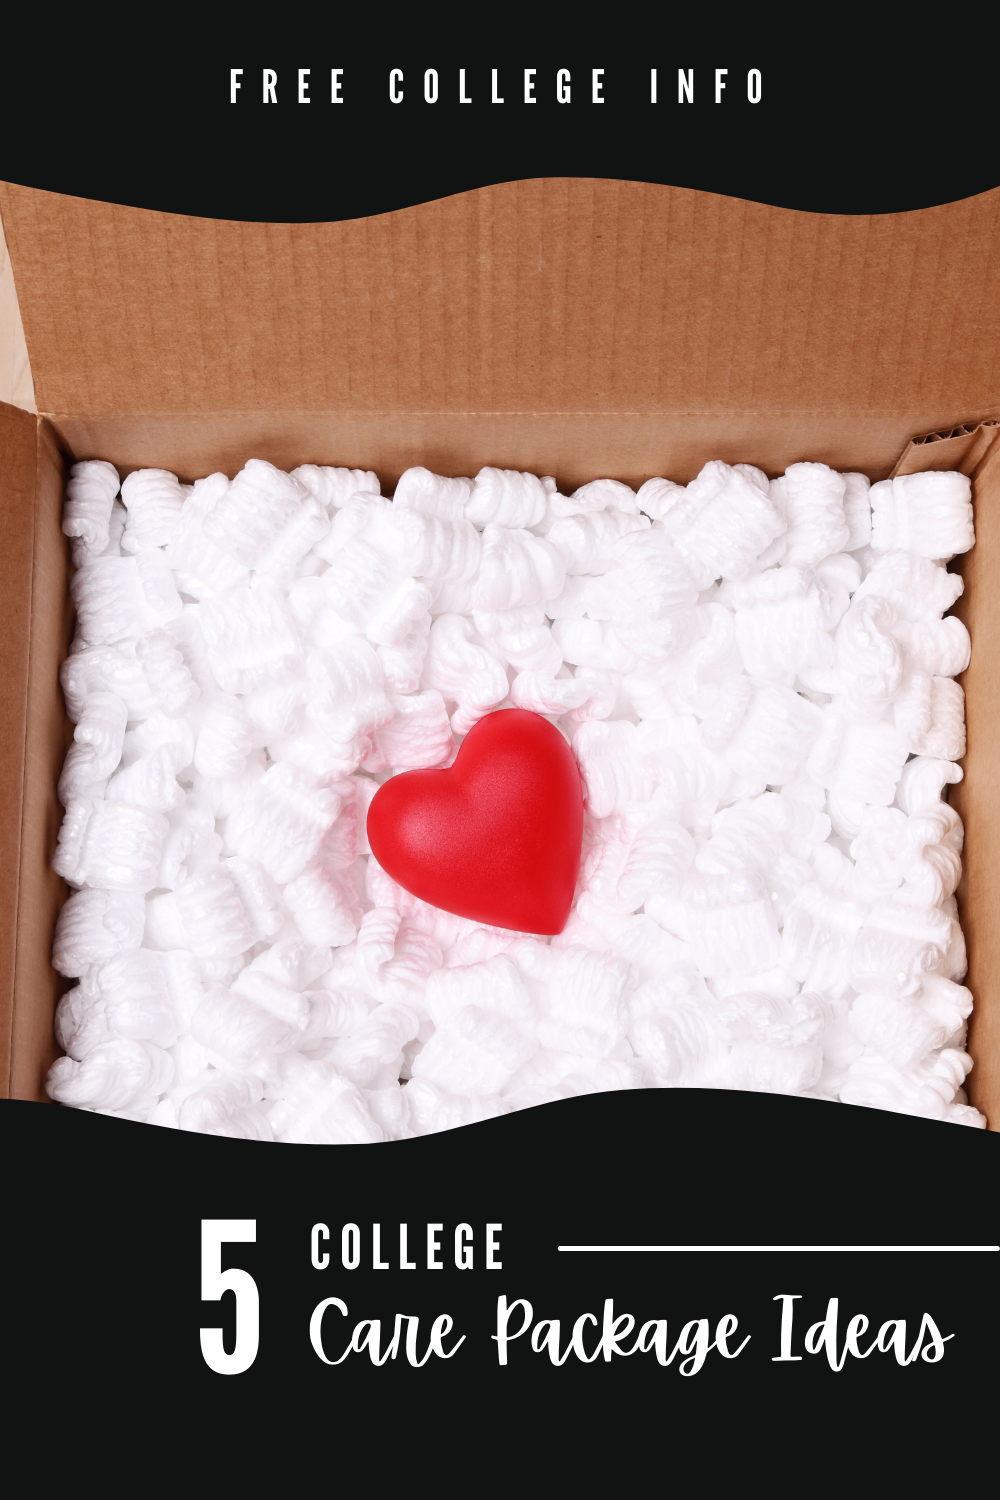 5 College Care Package Ideas